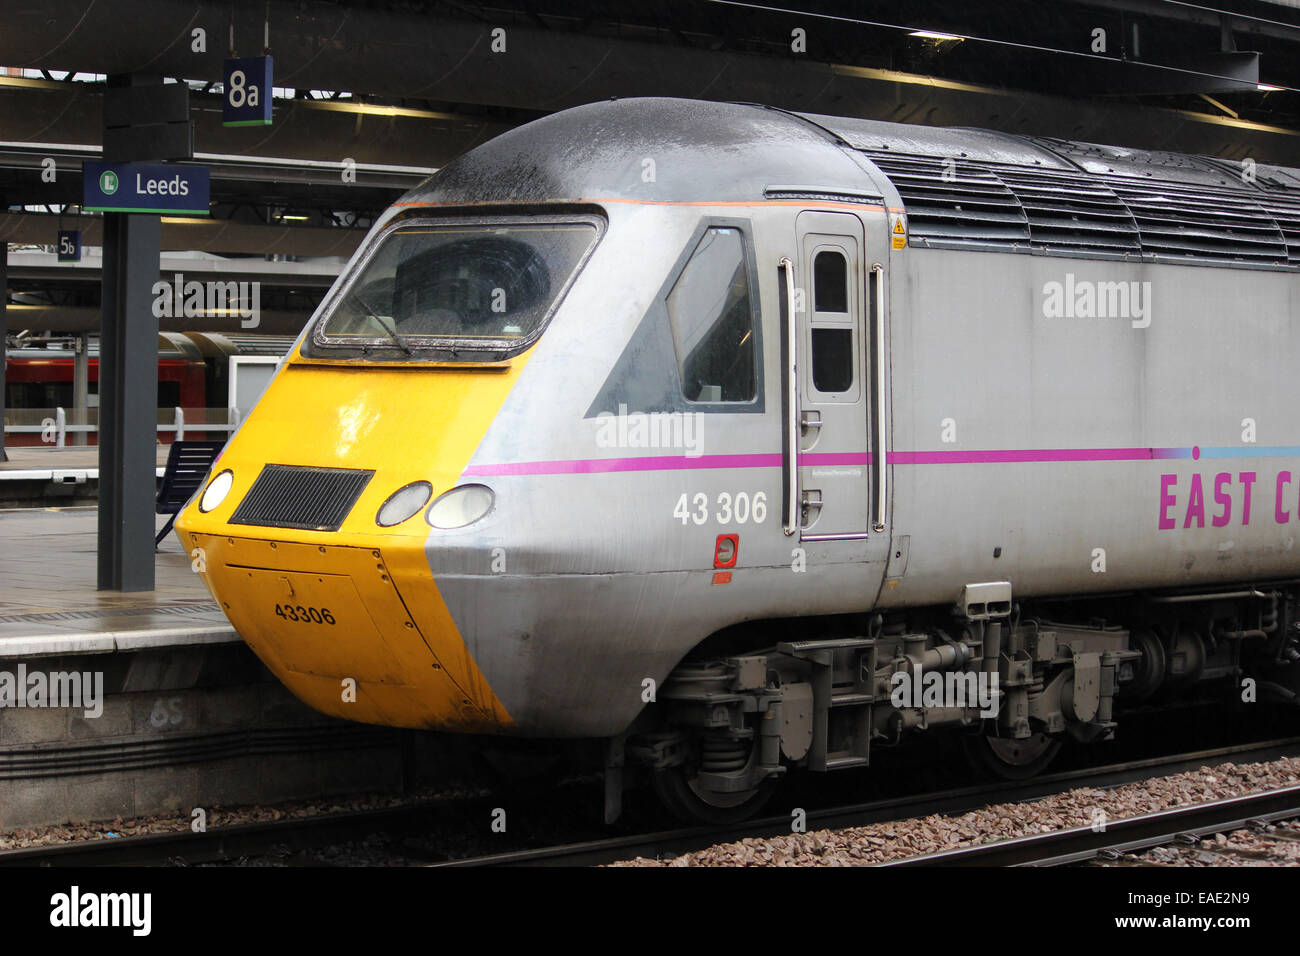 Power car number 43306 on a high speed train - diesel multiple unit - in East Coast livery at platform 8a Leeds railway station. Stock Photo